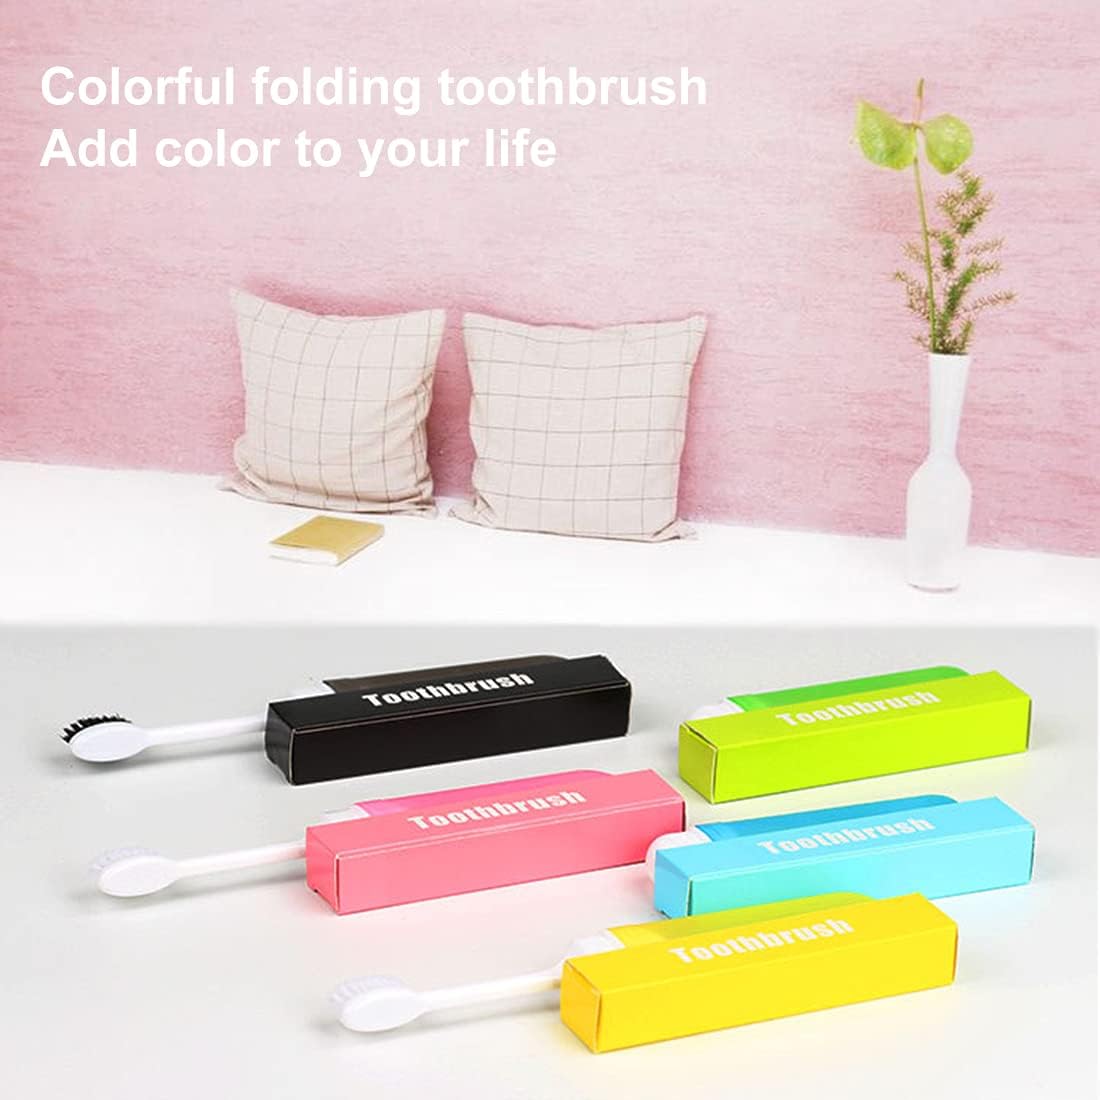 All color variants of Foldable Toothbrush placed together next to a plant pot and 2 pillows on a bed 